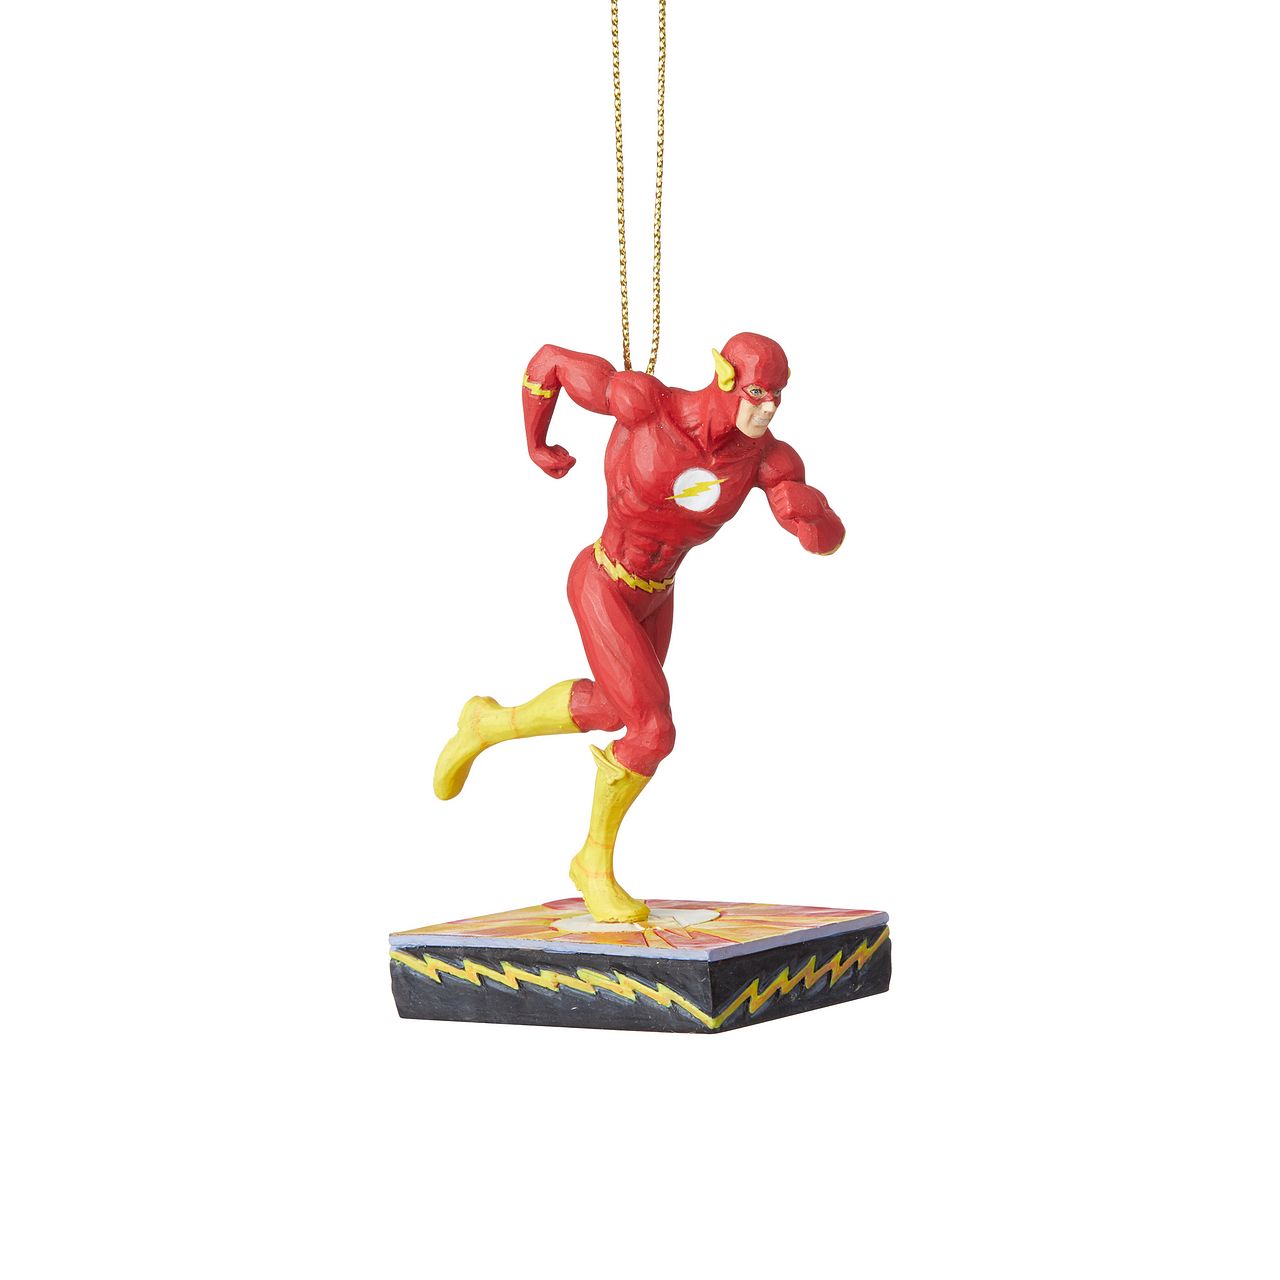 Jim Shore Flash Silver Age Christmas Hanging Ornament  DC Comics’ Justice League is comprised of the world’s most iconic superheroes. Jim Shore celebrates The Flash in an iconic pose in his signature wood carved look and folk art styling. Sure to be a treasured gift across the generations.